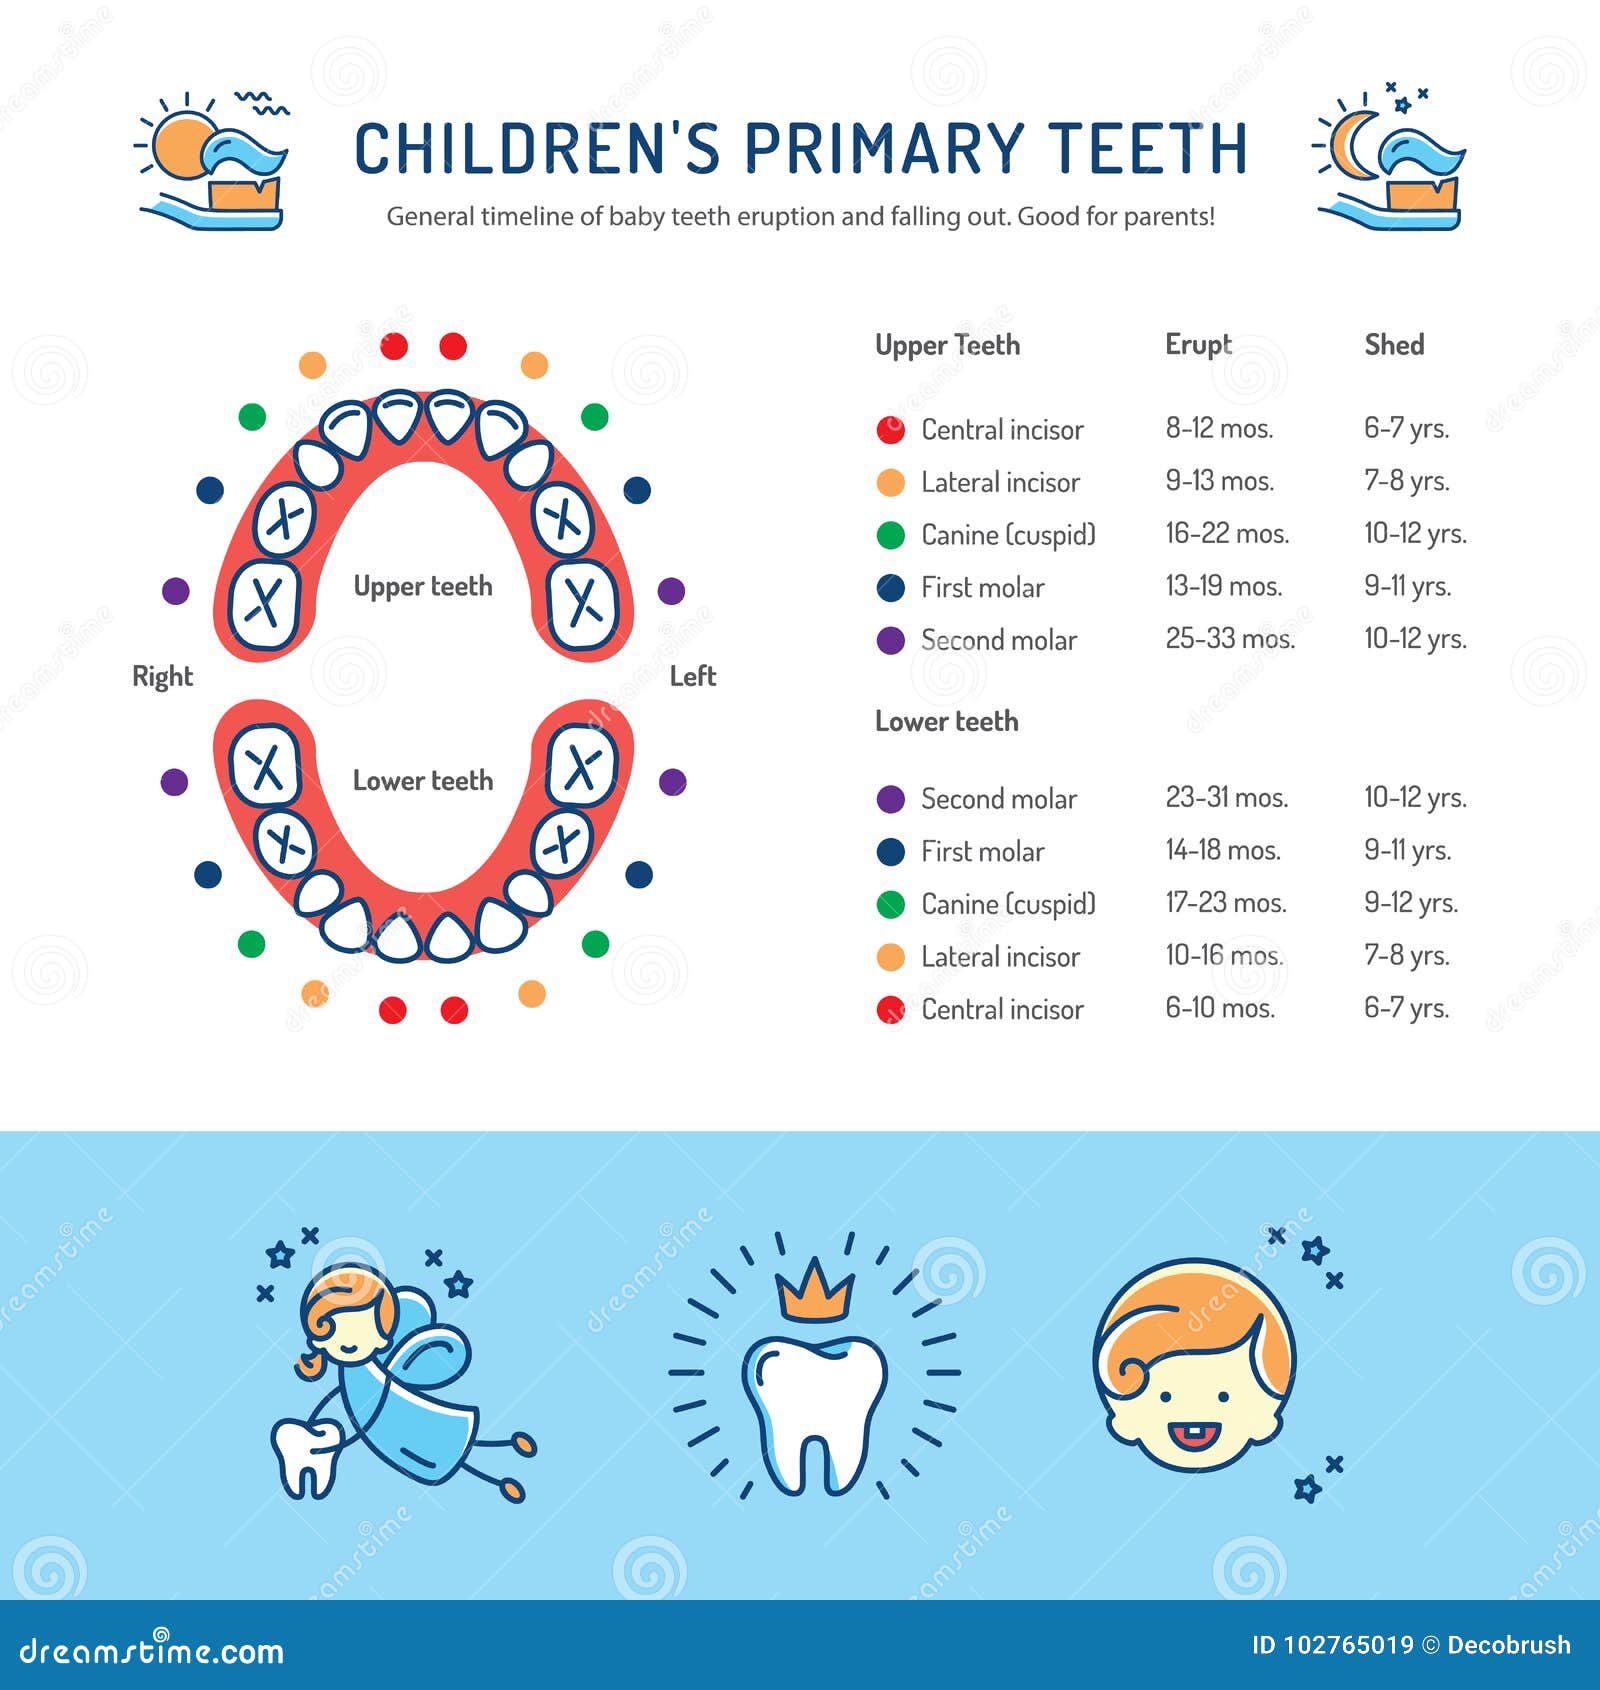 childrens primary teeth, schedule of baby teeth eruption. childrens dentistry infographics